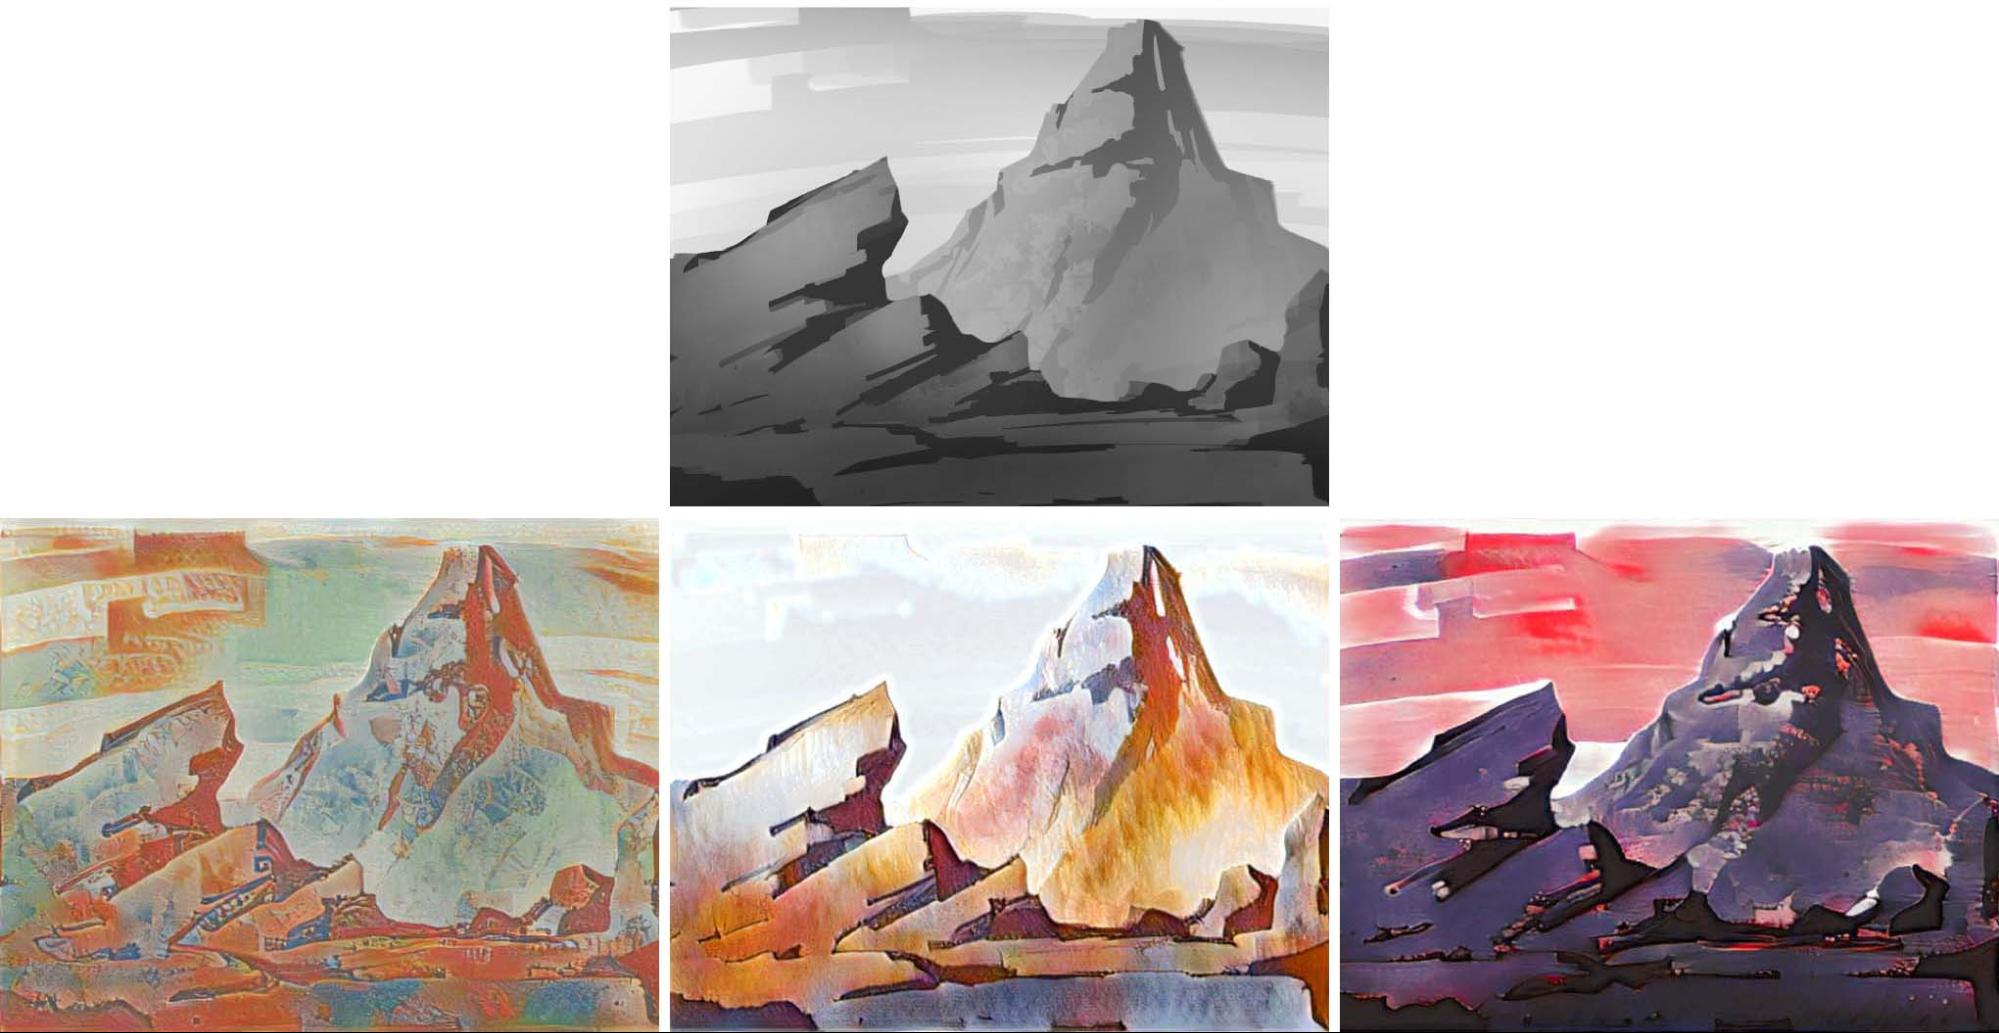 Landscapes in different styles